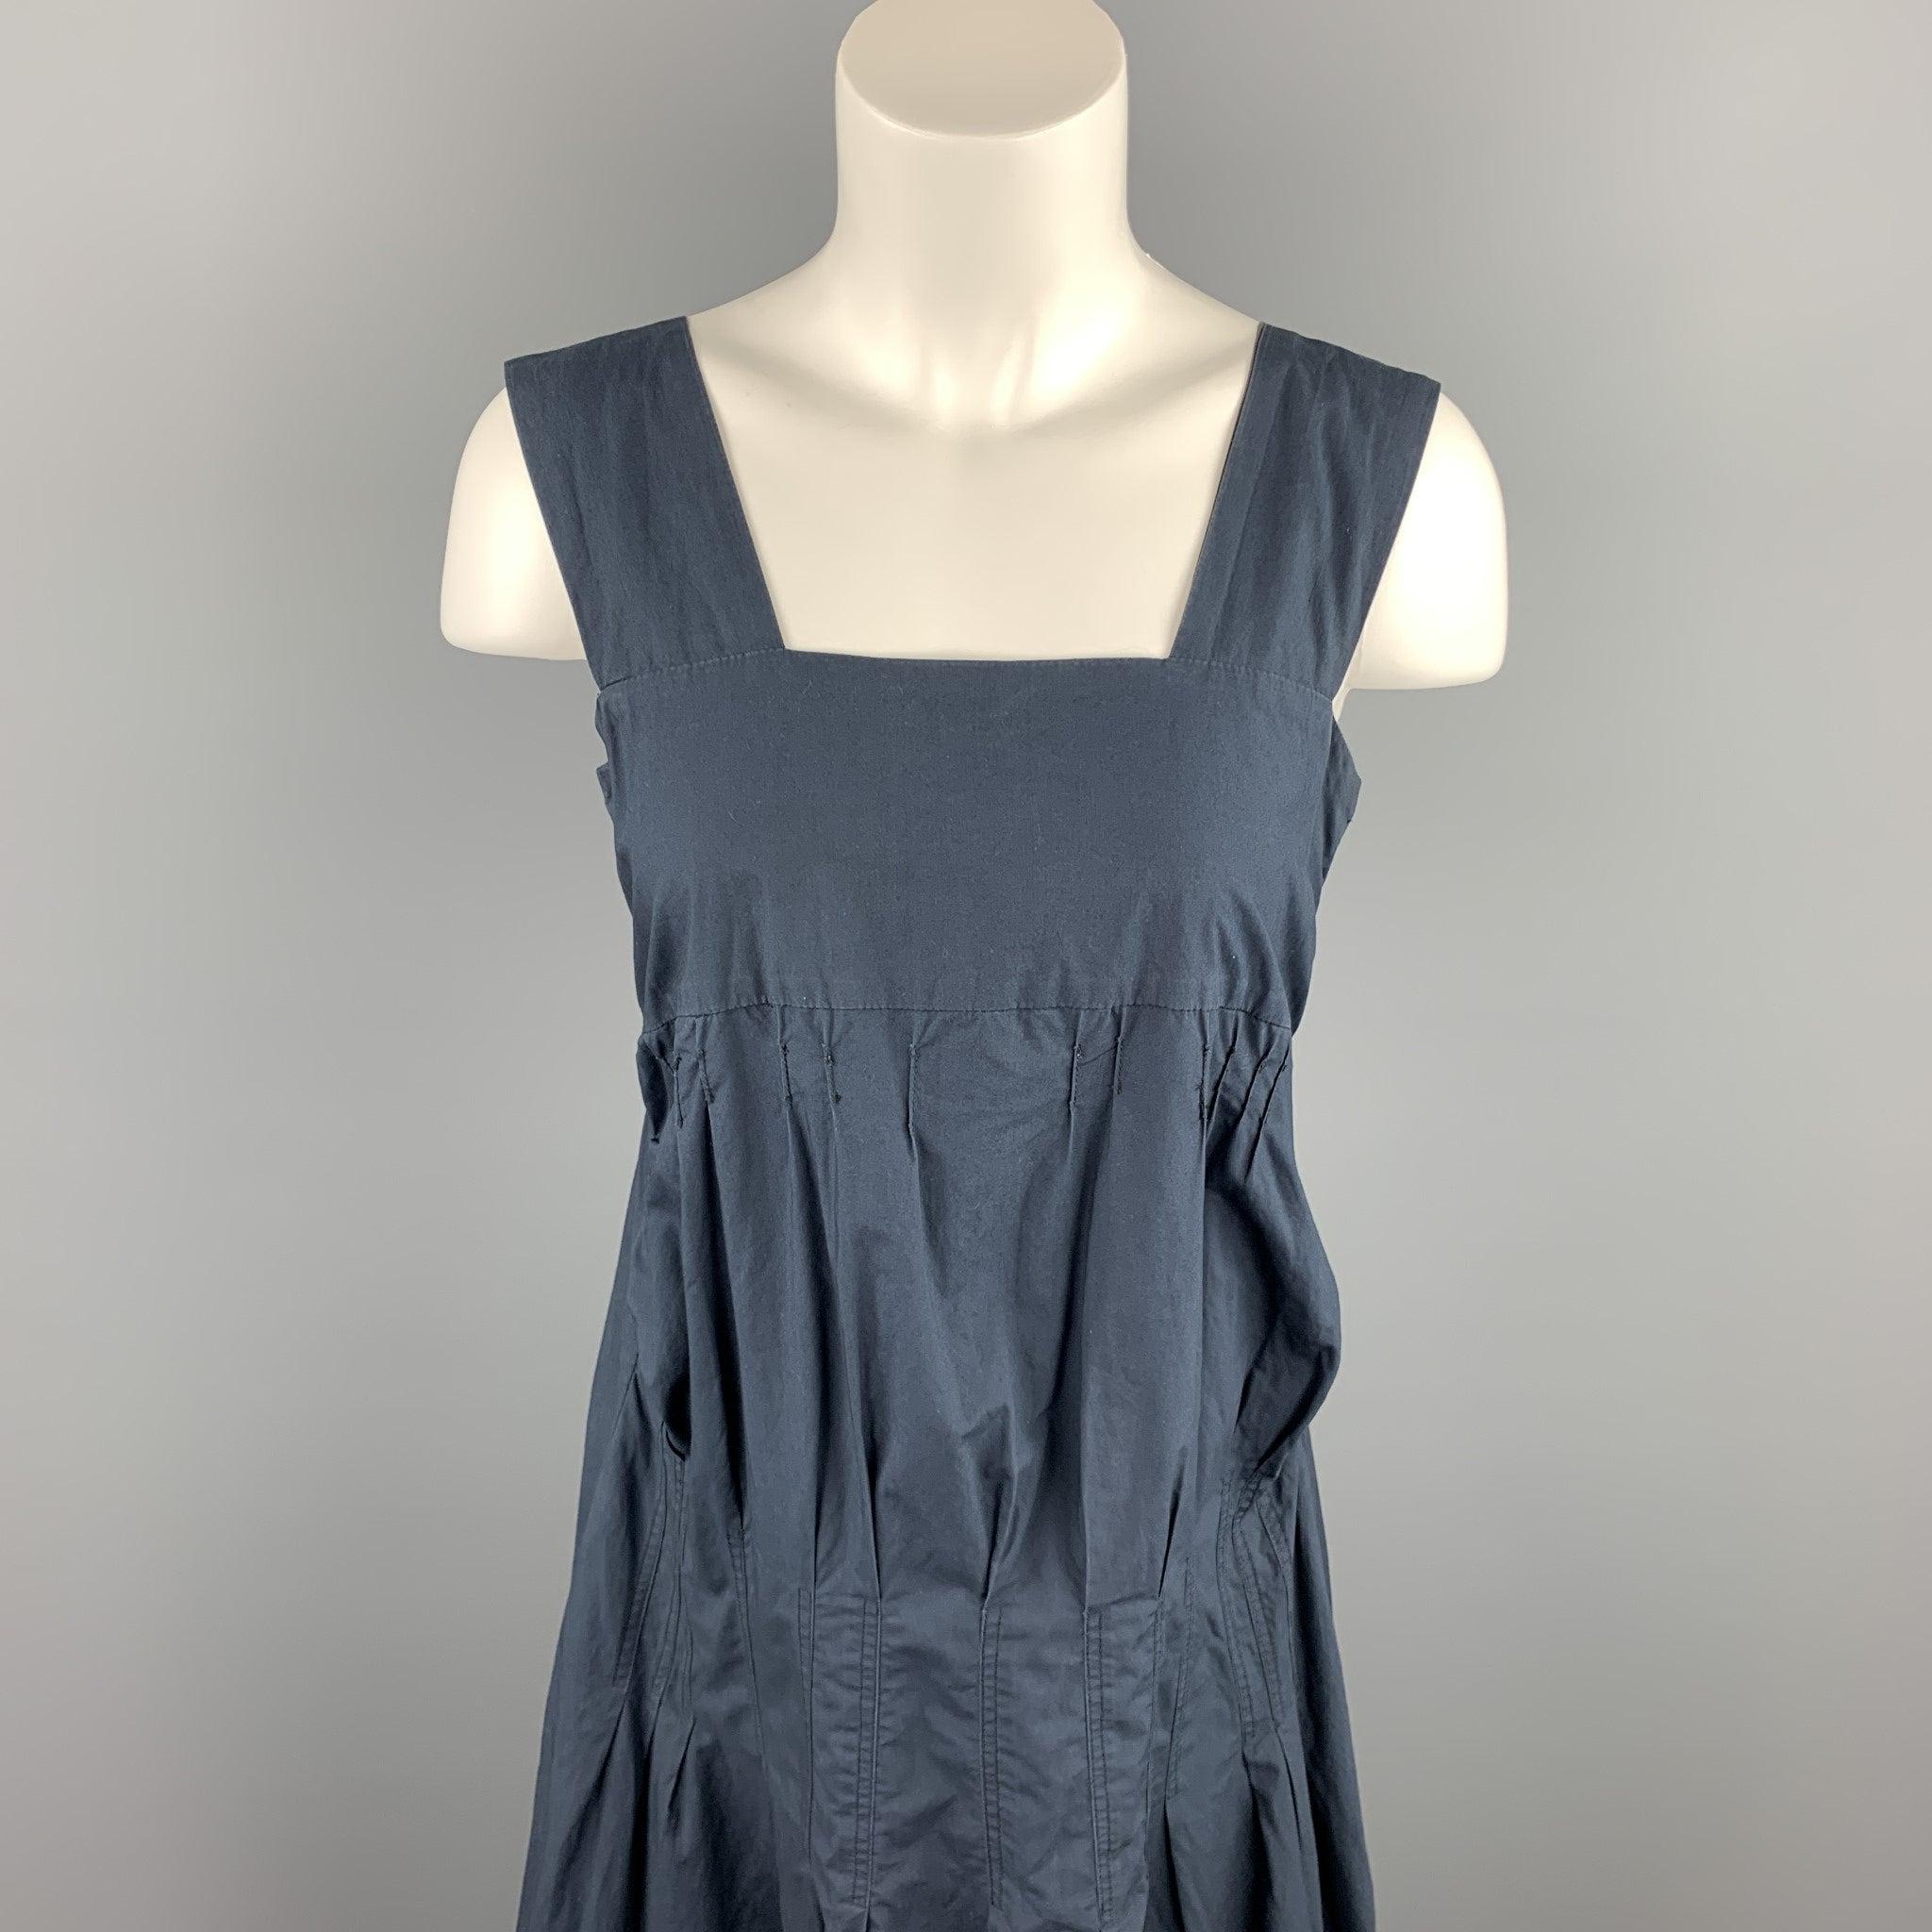 MARNI sleeveless dress comes in a navy poplin cotton featuring pleated designs and a side zipper closure. Made in Italy.Very Good
Pre-Owned Condition. 

Marked:   IT 40 

Measurements: 
  Bust: 30 inches 
Waist: 32 im.
Hip: 40 inches 
Length: 32.5